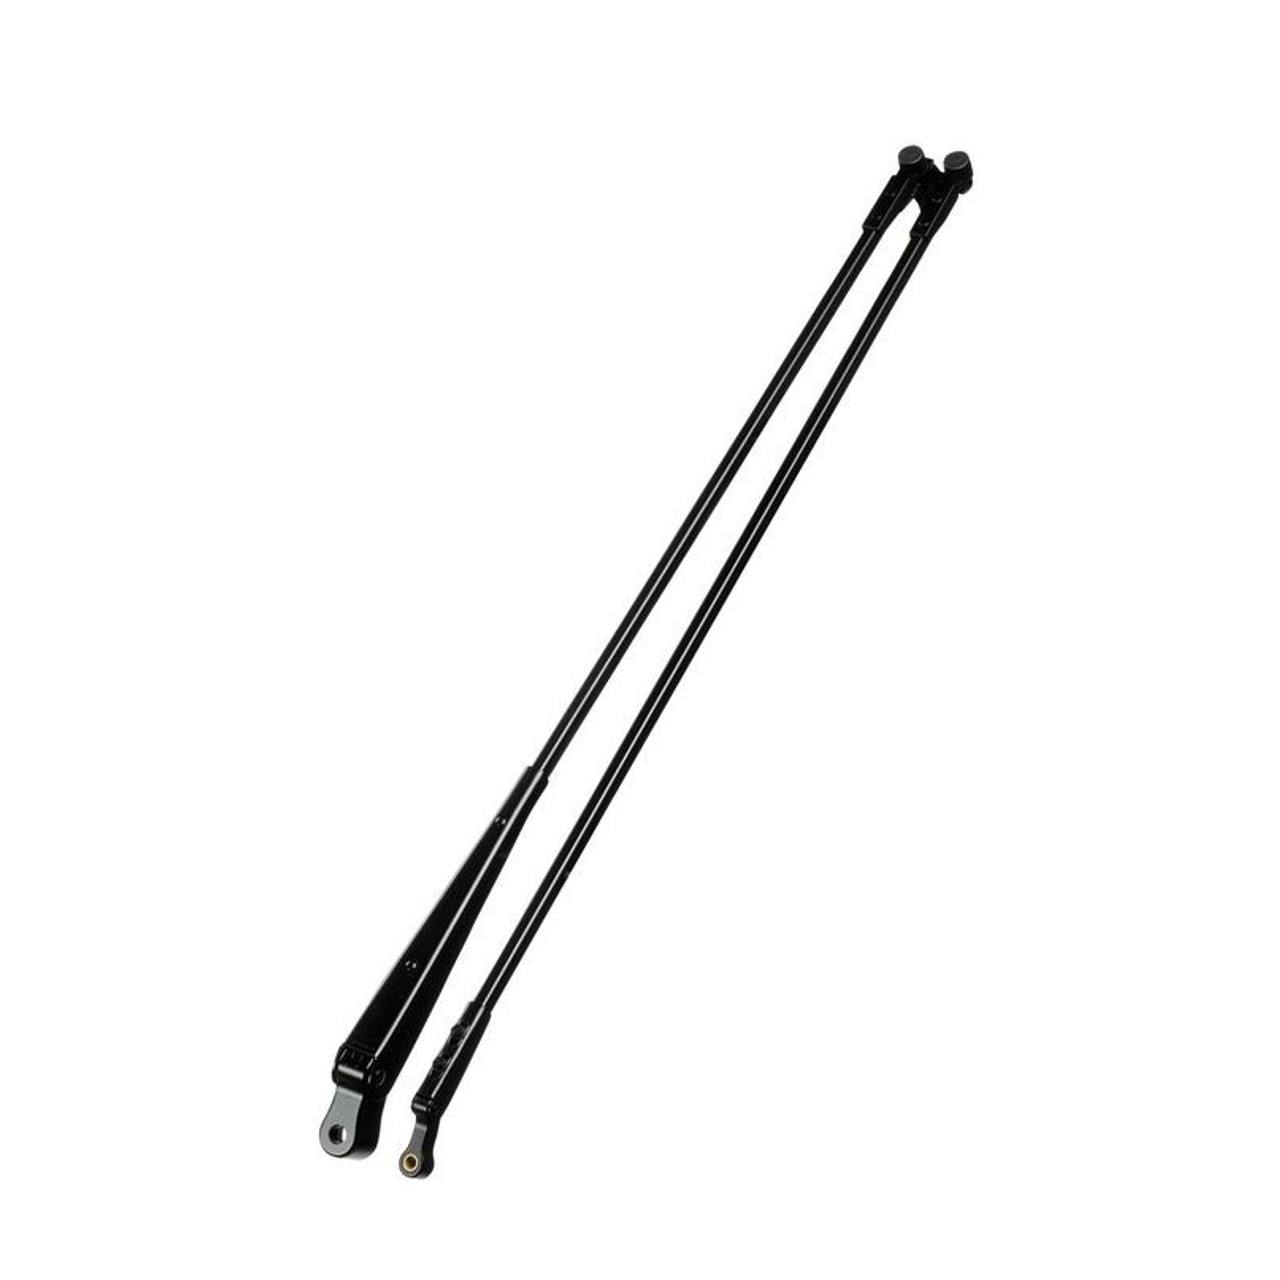 Wexco 20 in. Pantograph Dry Dyna Wiper Arm Double Flat Shaft - 200463